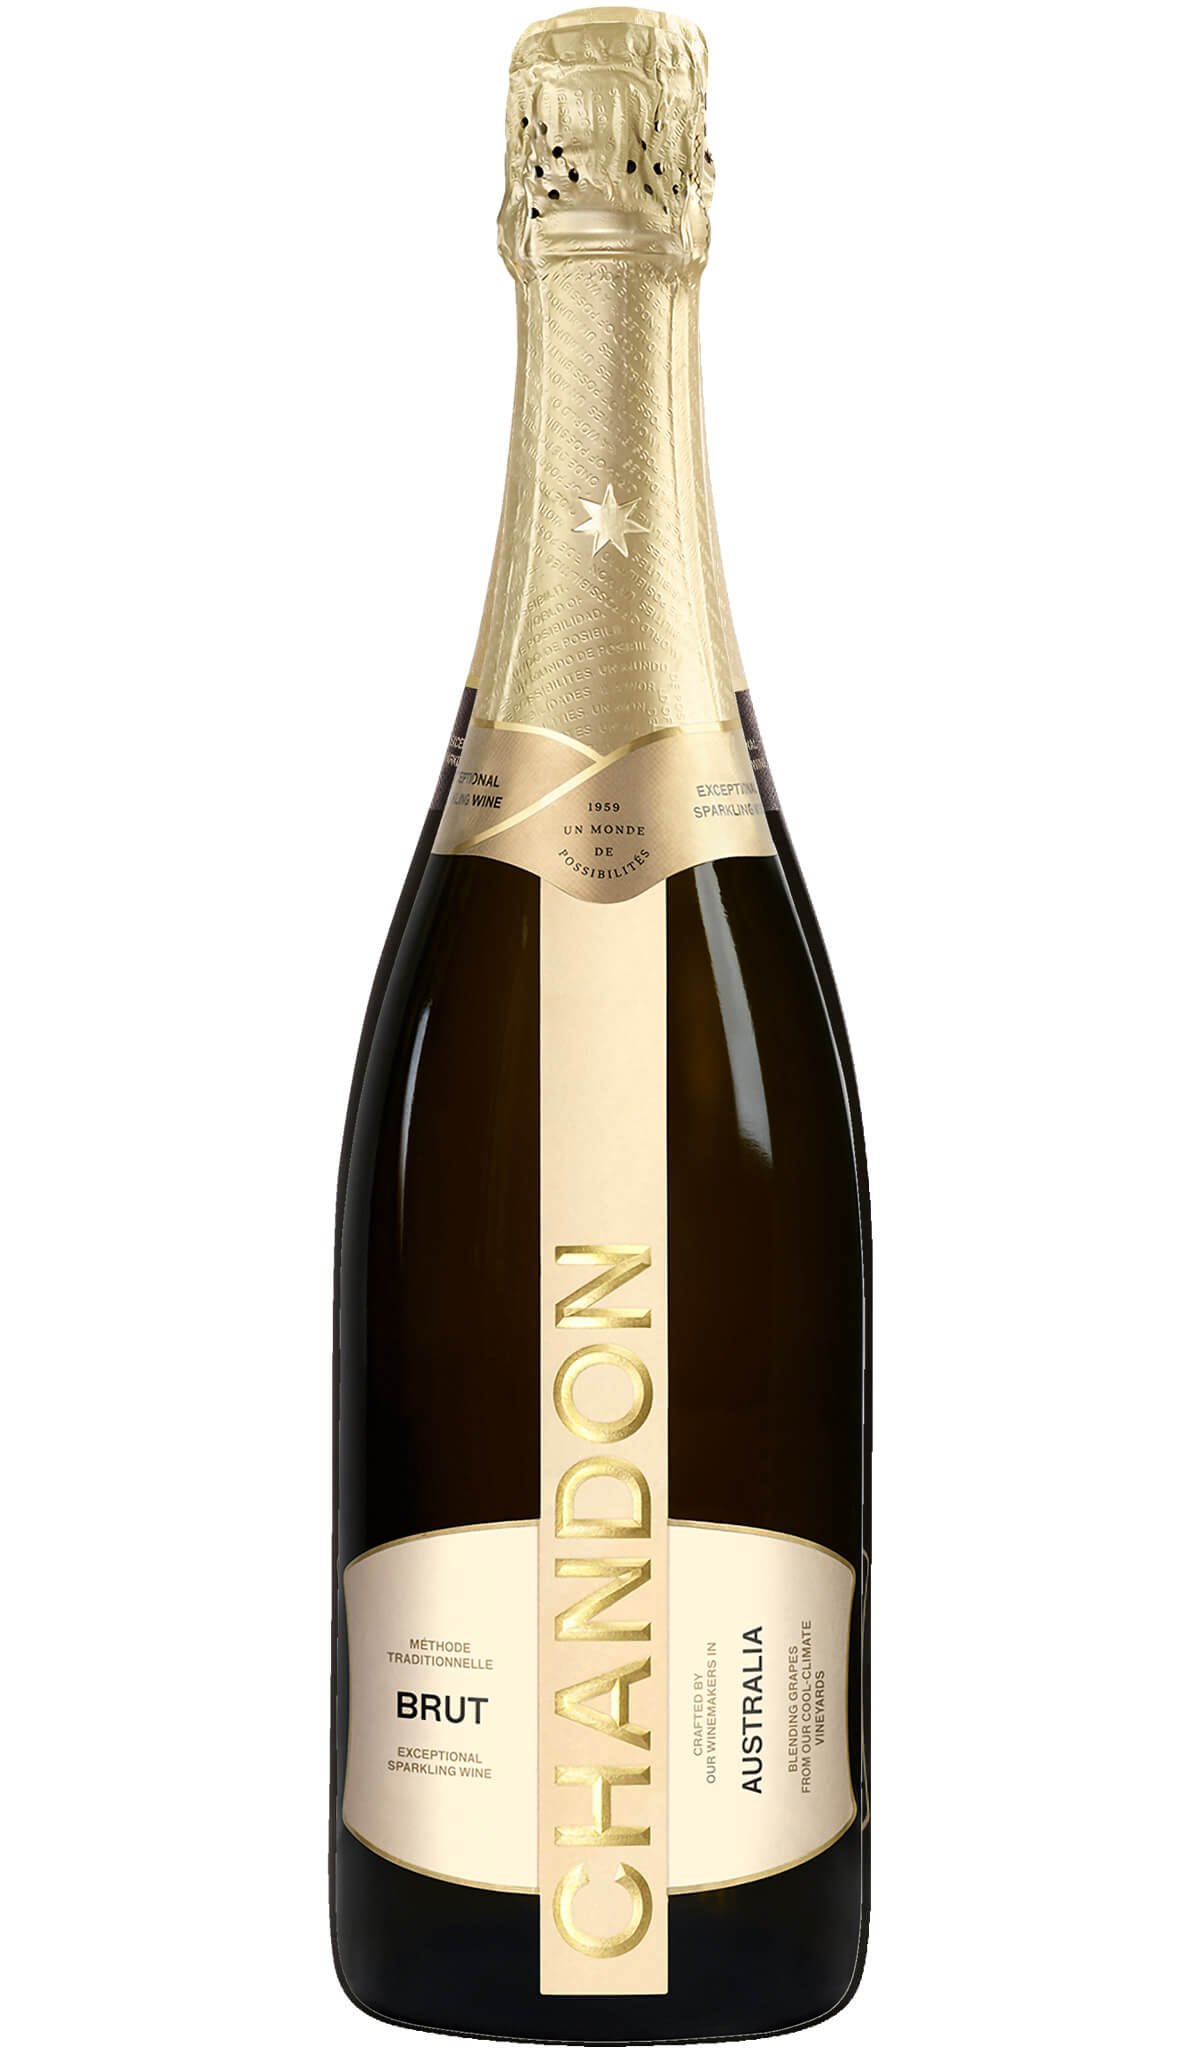 Find out more or buy Chandon Sparkling Brut NV 750ml online at Wine Sellers Direct - Australia’s independent liquor specialists.